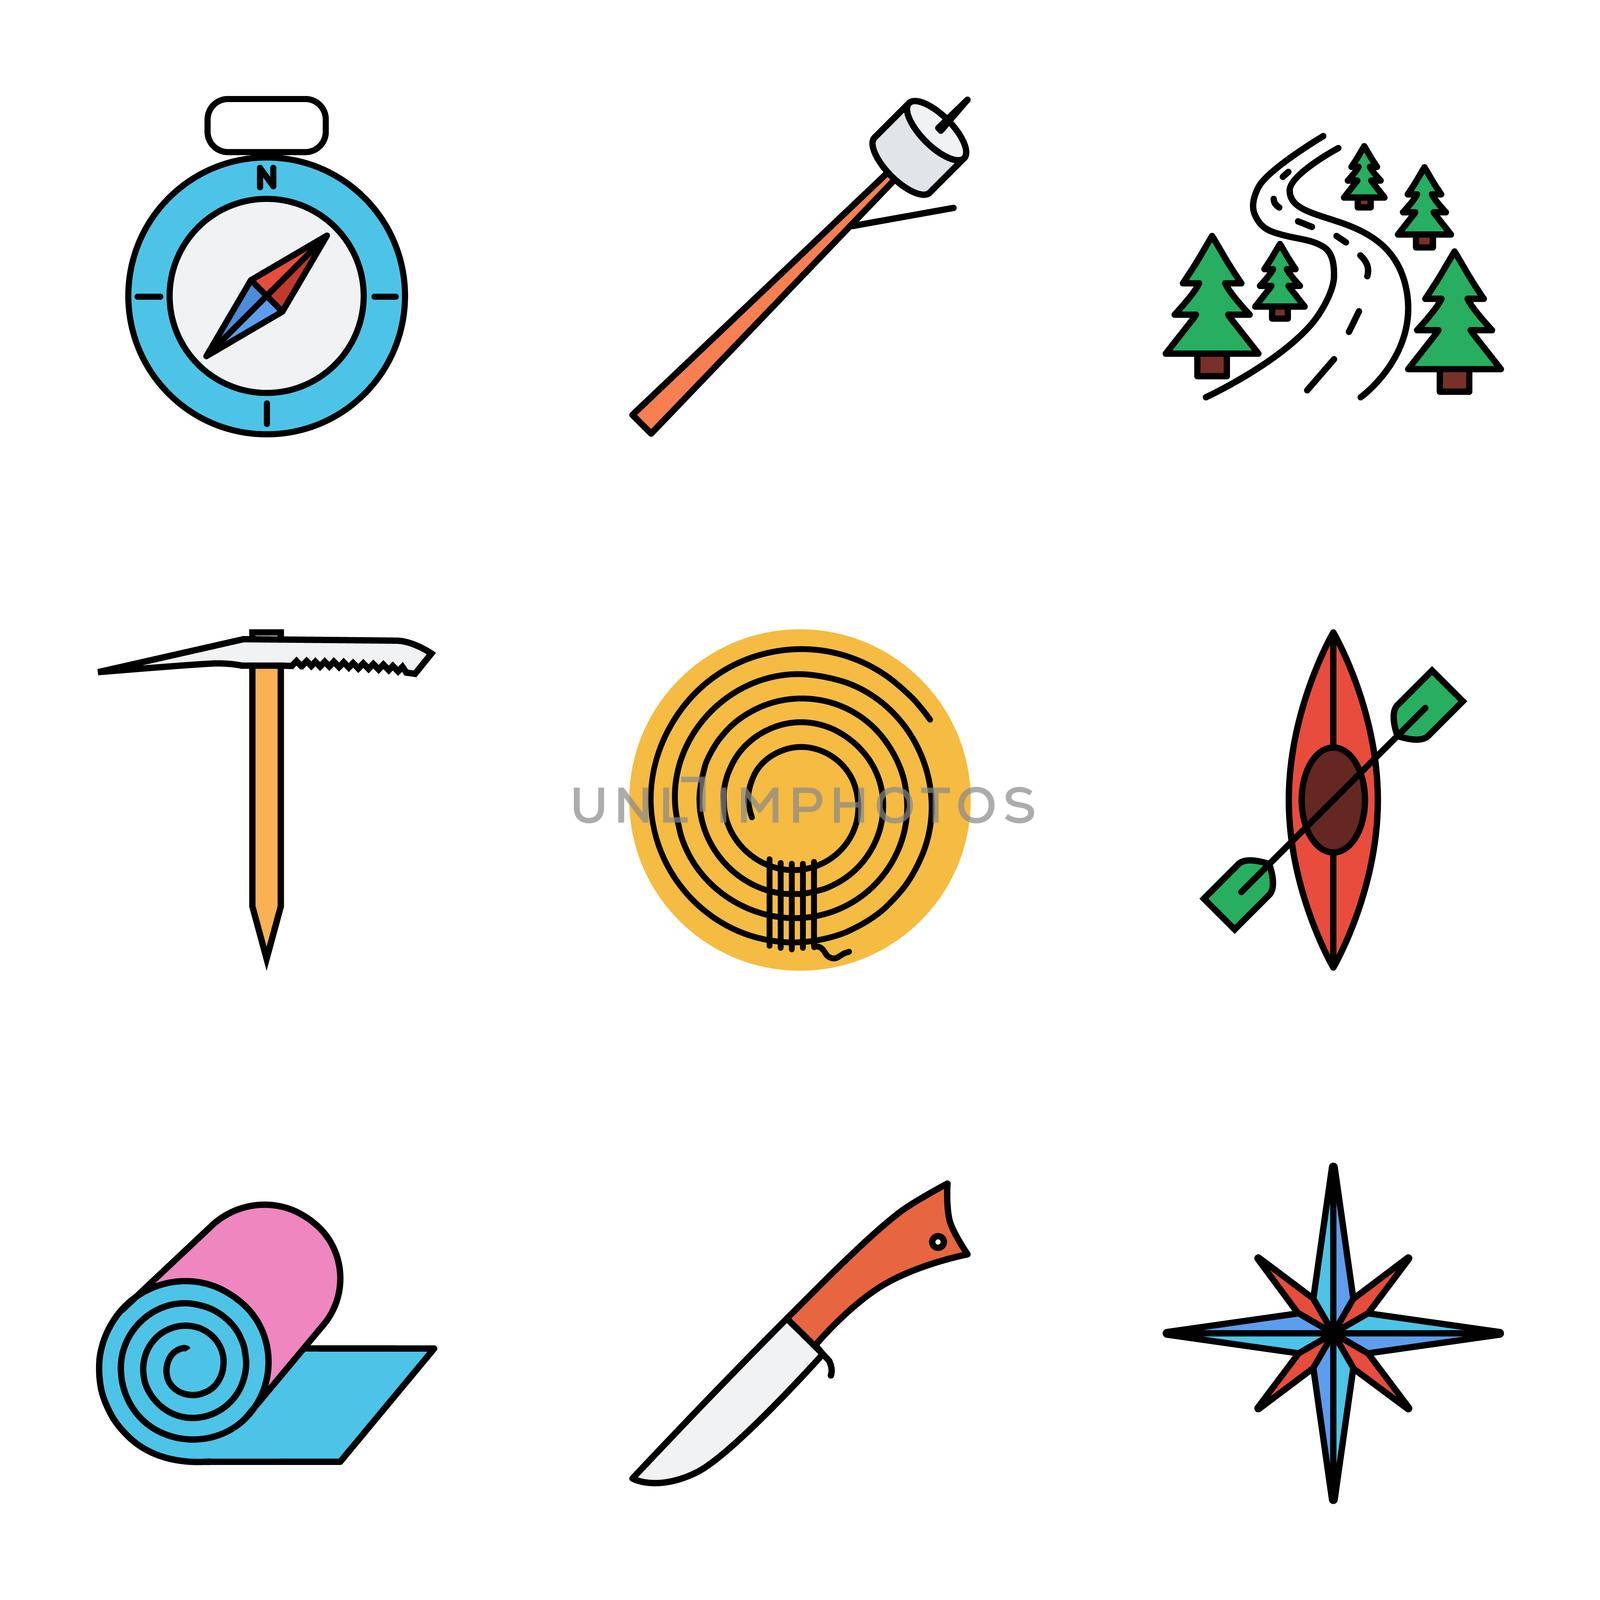 Camping flat icon set for web and mobile applications. Set includes - compass, marshmallov, road, ice axe, rope, canoe, penknife, mat, wind rose. It can be used as - logo, pictogram, icon, infographic element.